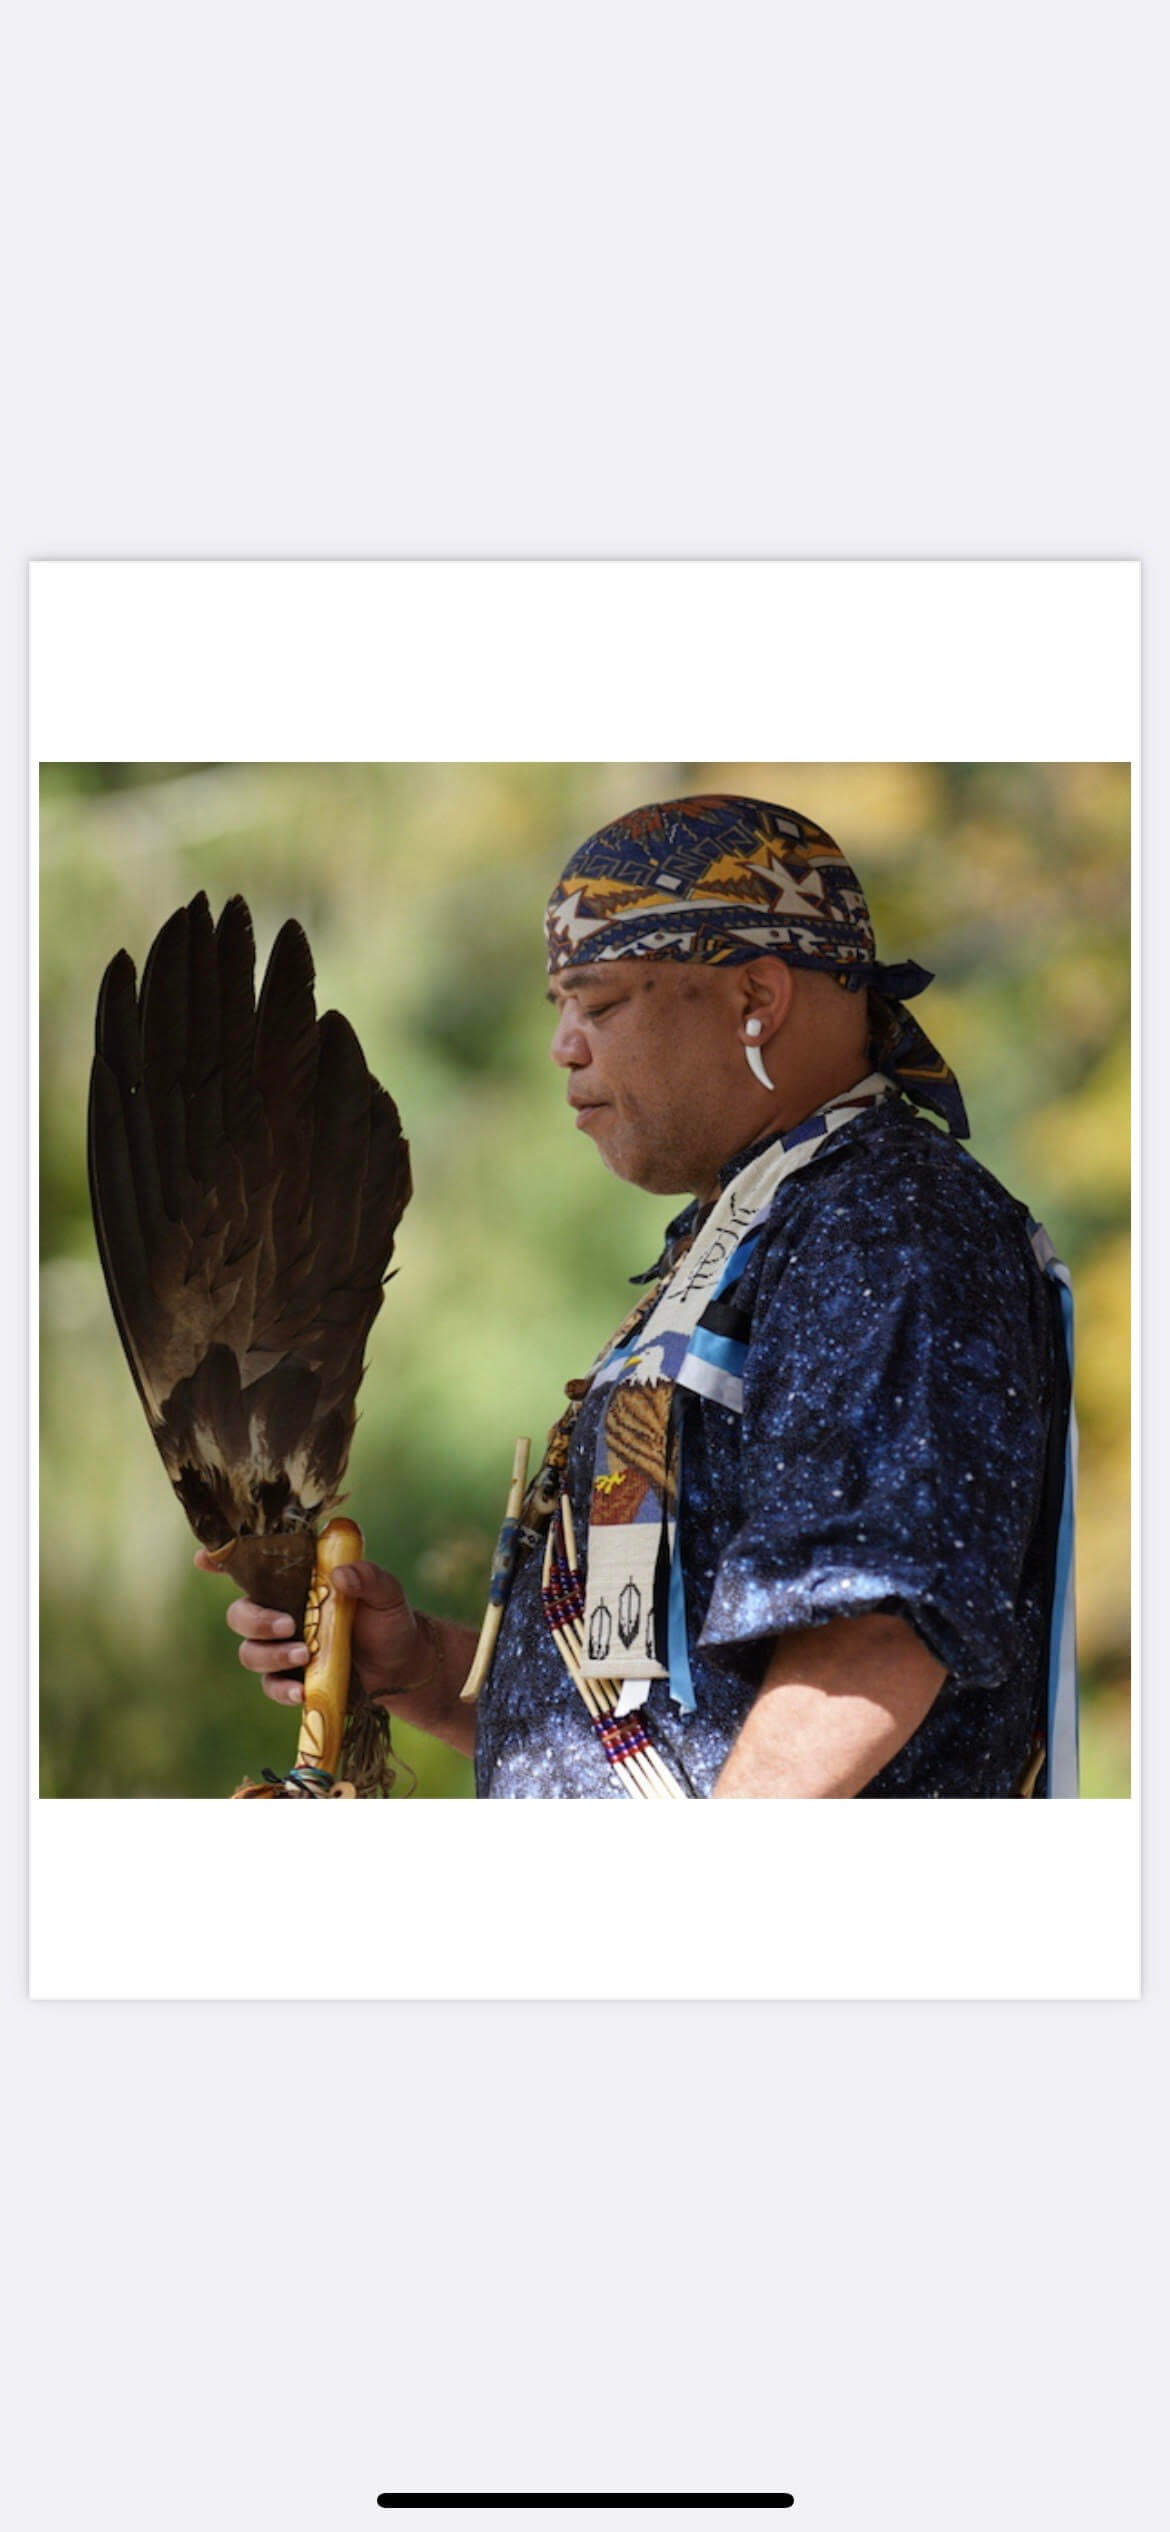 Fifteen tribal nations, including the Stockbridge-Munsee Band of the Mohicans, will join a celebration of Native American culture in South County on the weekend of Oct. 8-10. 